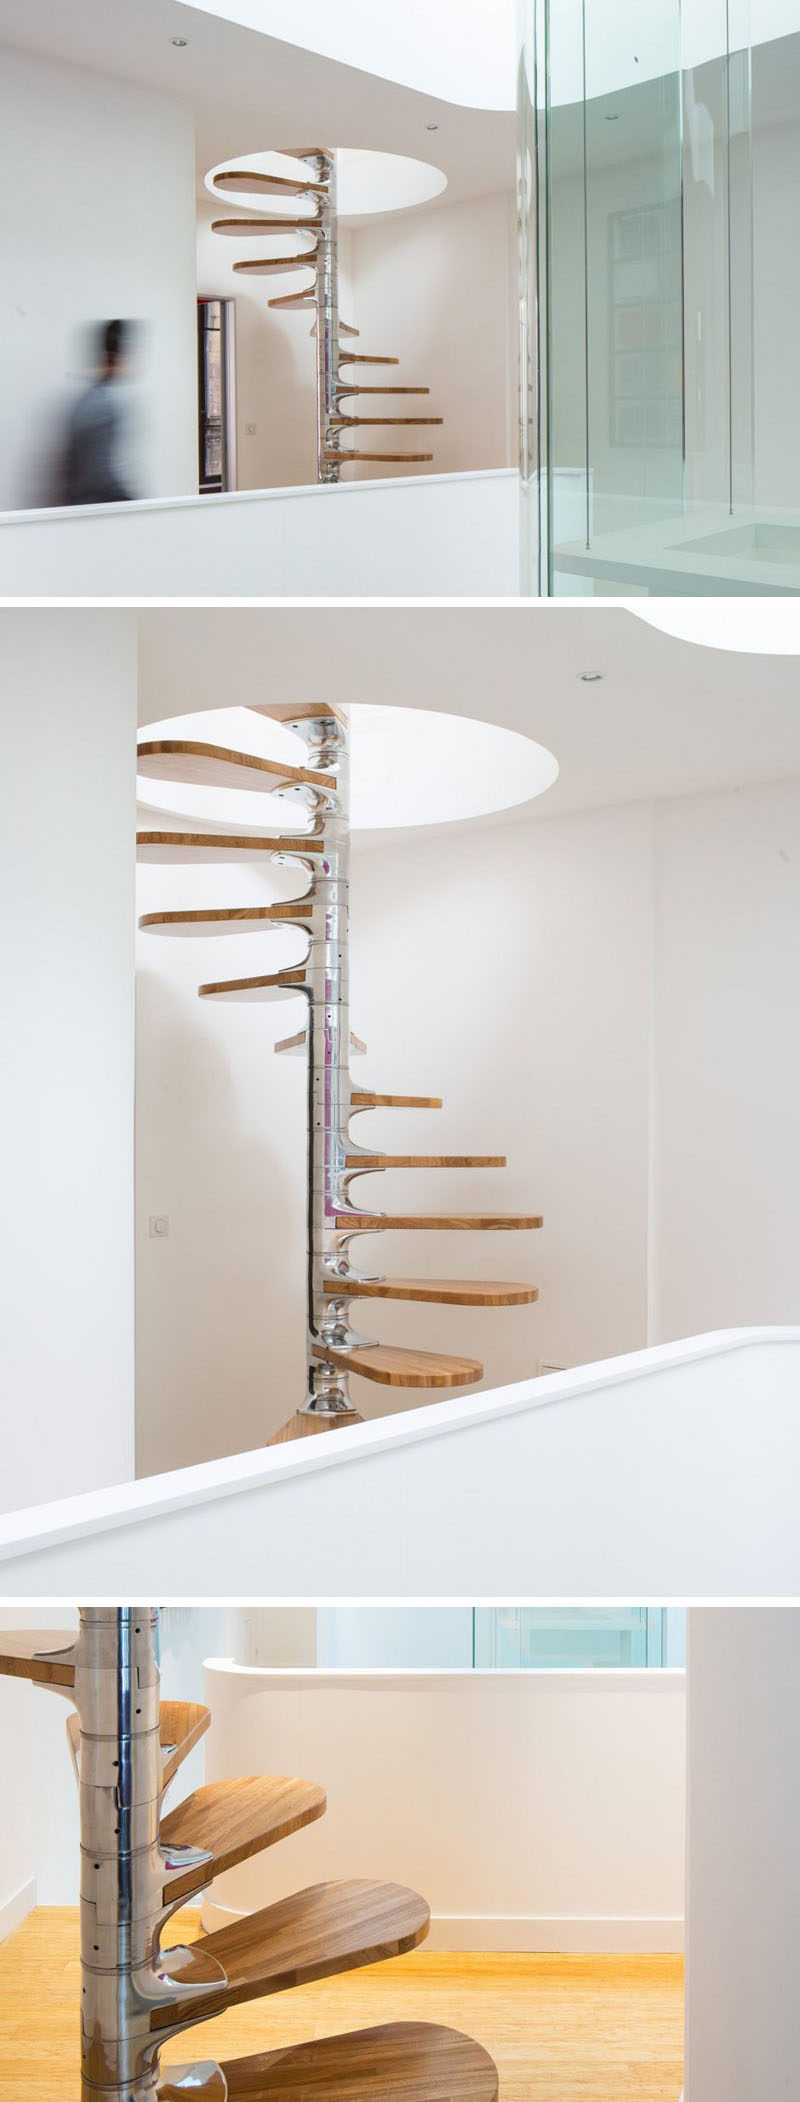 This small modern spiral staircase is a made from polished metal with wood stair treads wrapping around it. The staircase travels through a hole in the ceiling to the upper floor. #SpiralStairs #SpiralStaircase #ModernSpiralStairs